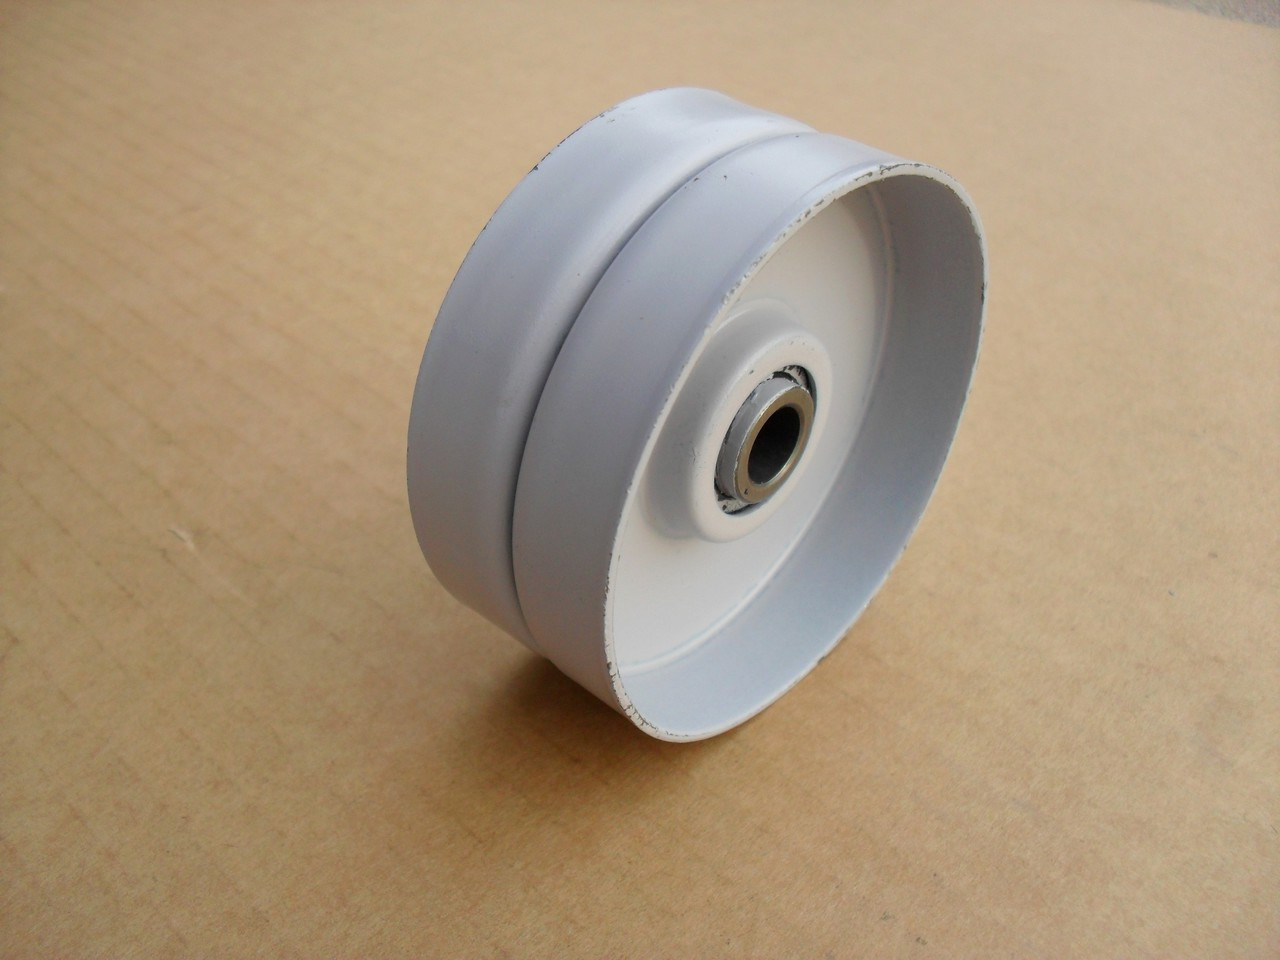 Flat Idler Pulley for Snapper 76520 7076520 7076520YP 7-6520 Height: 1-3/16" ID: 3/8" OD: 2-3/4"